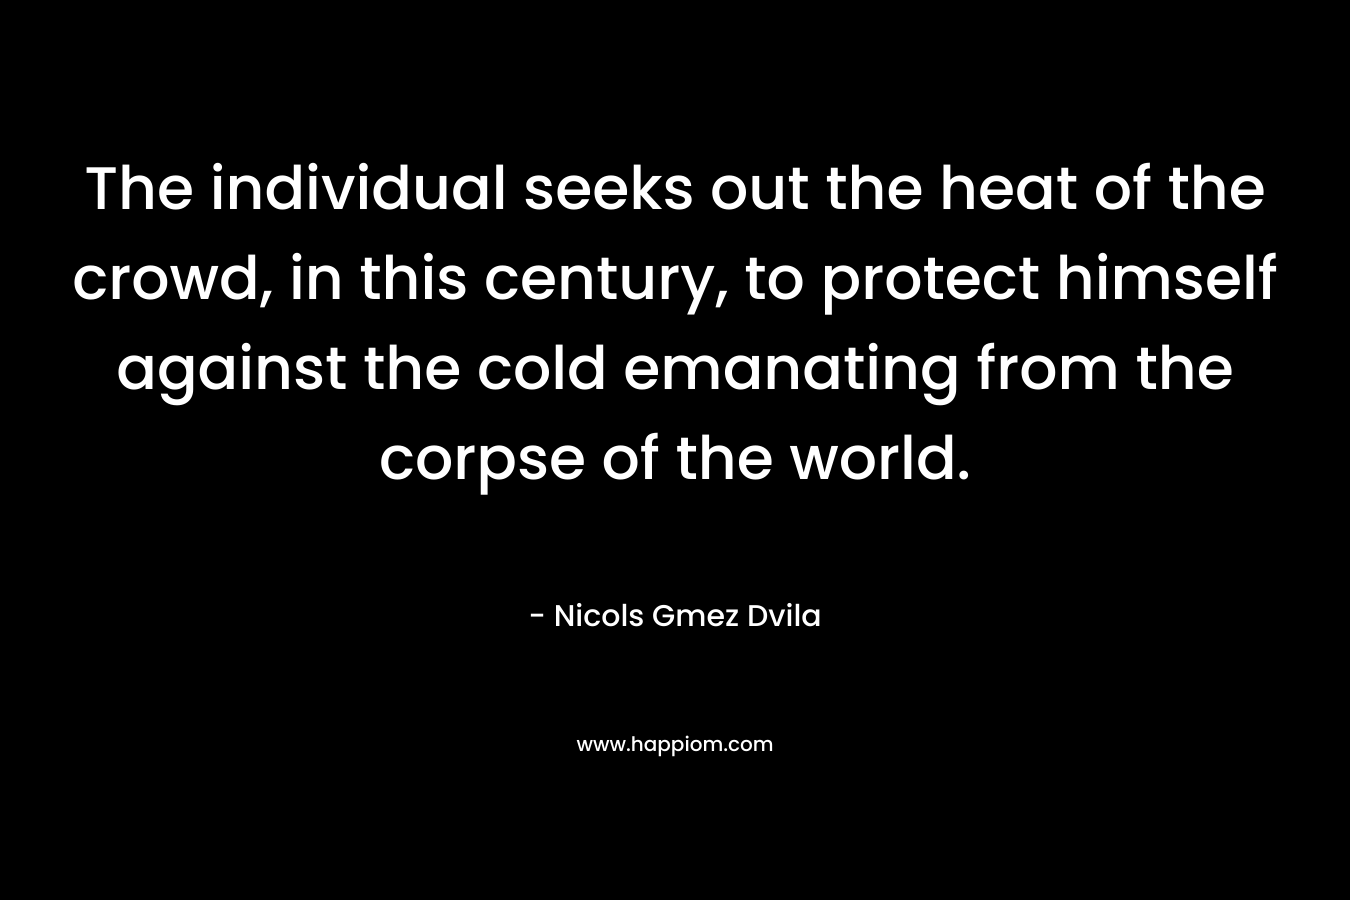 The individual seeks out the heat of the crowd, in this century, to protect himself against the cold emanating from the corpse of the world. – Nicols Gmez Dvila